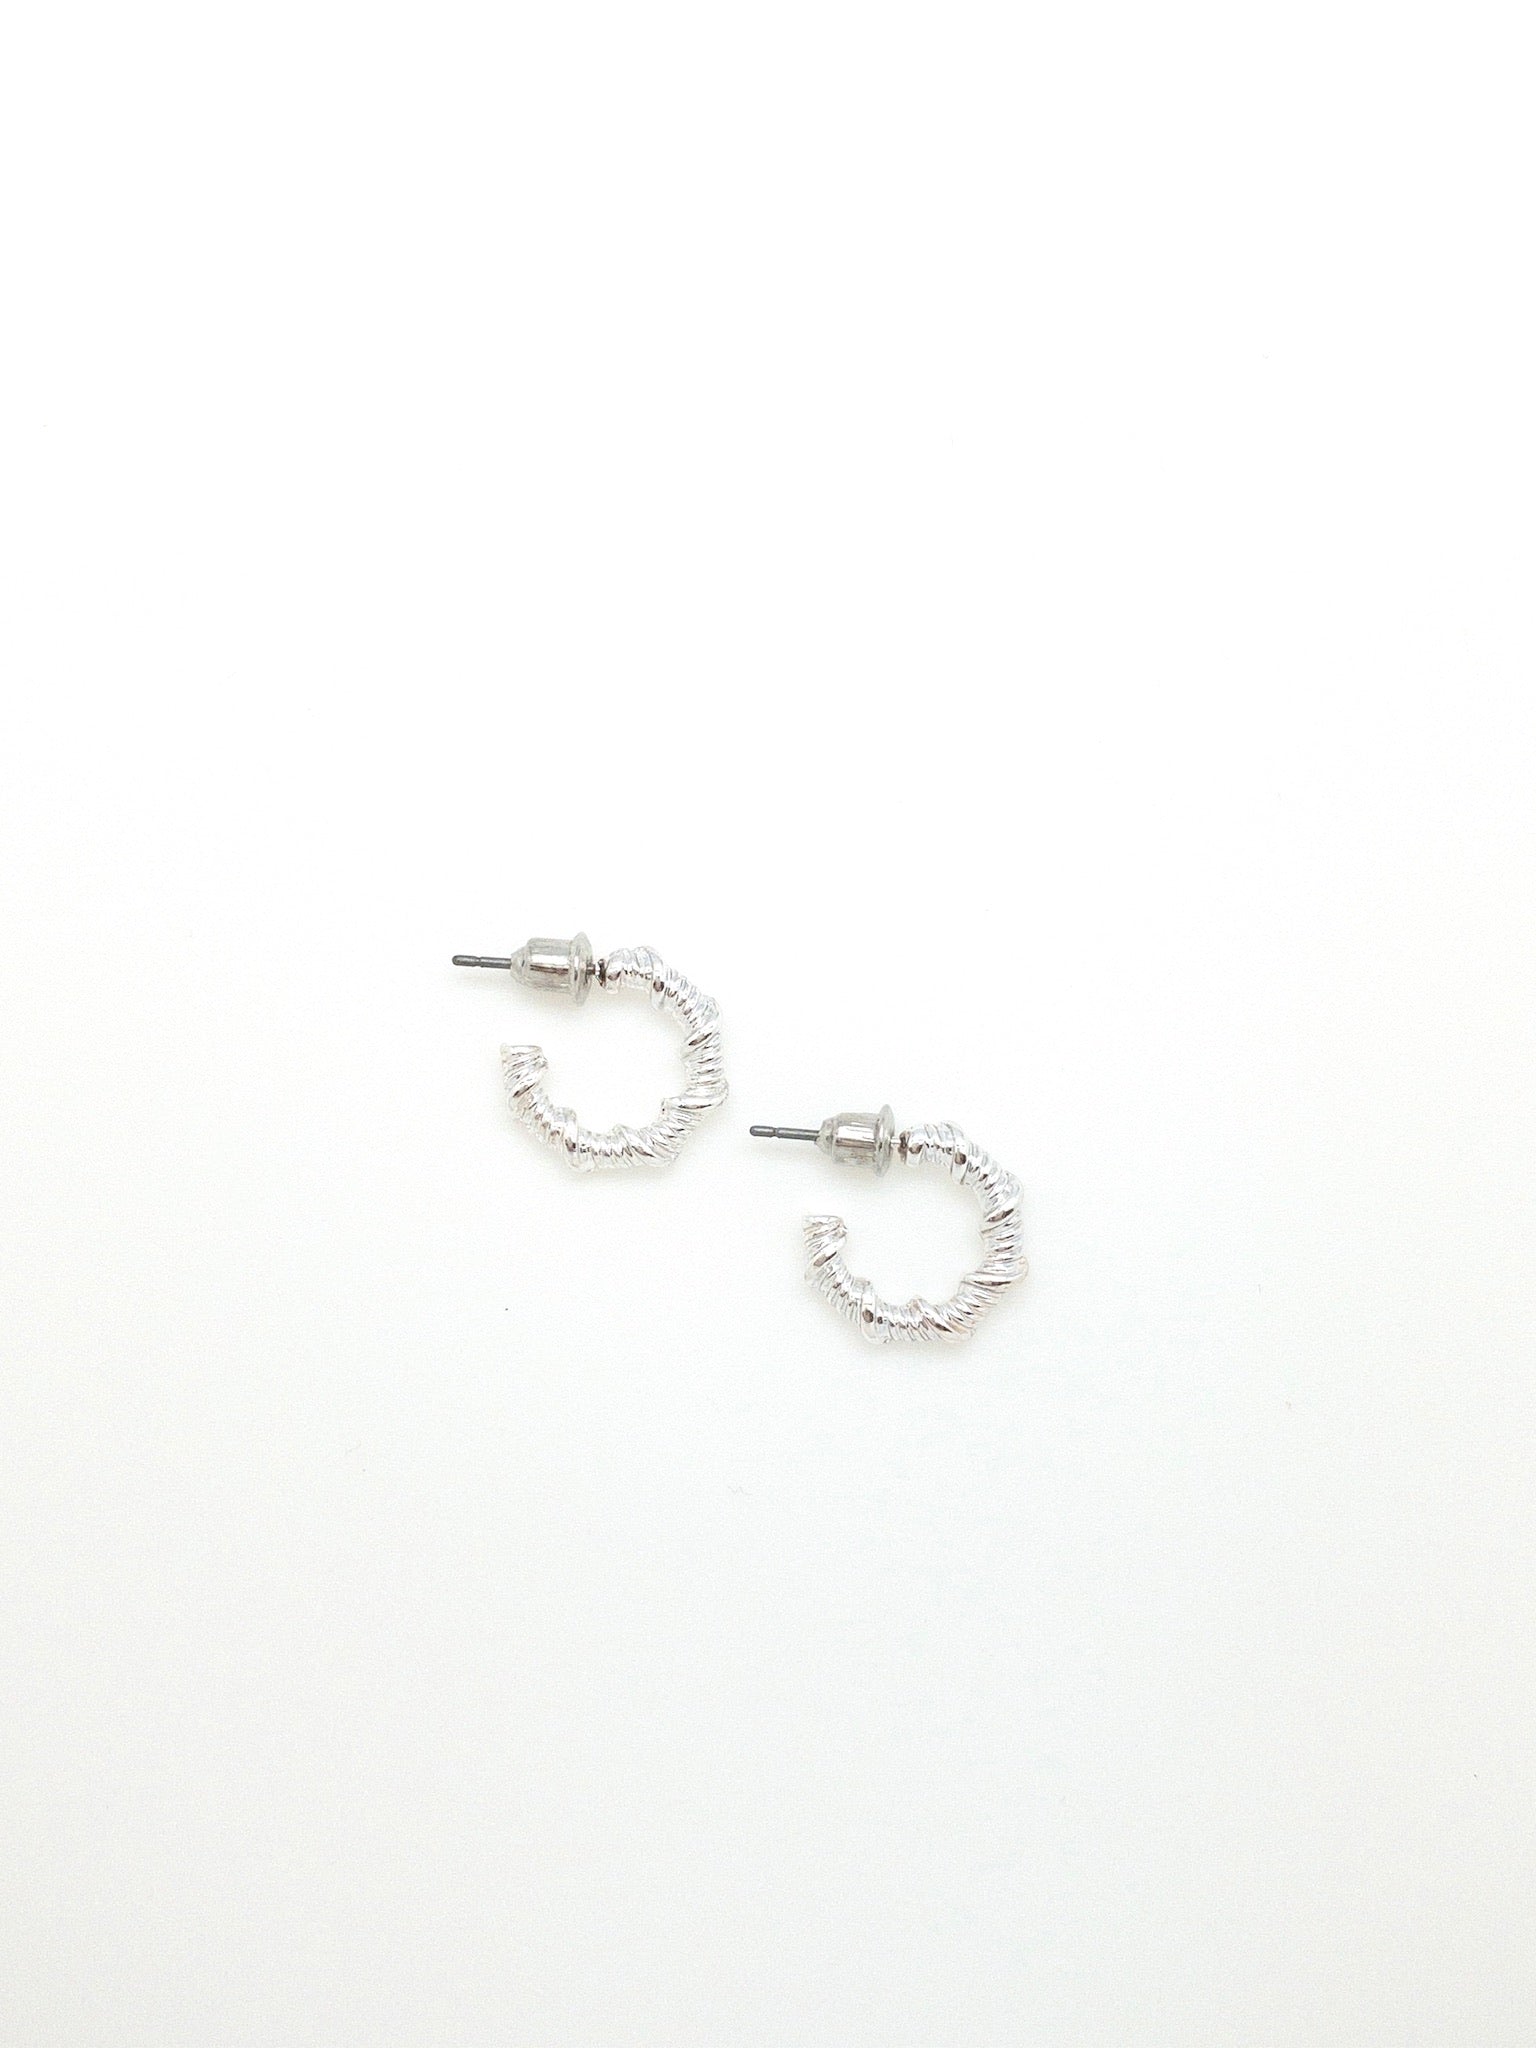 Layla small silver hoop earrings with a twisted rope detail